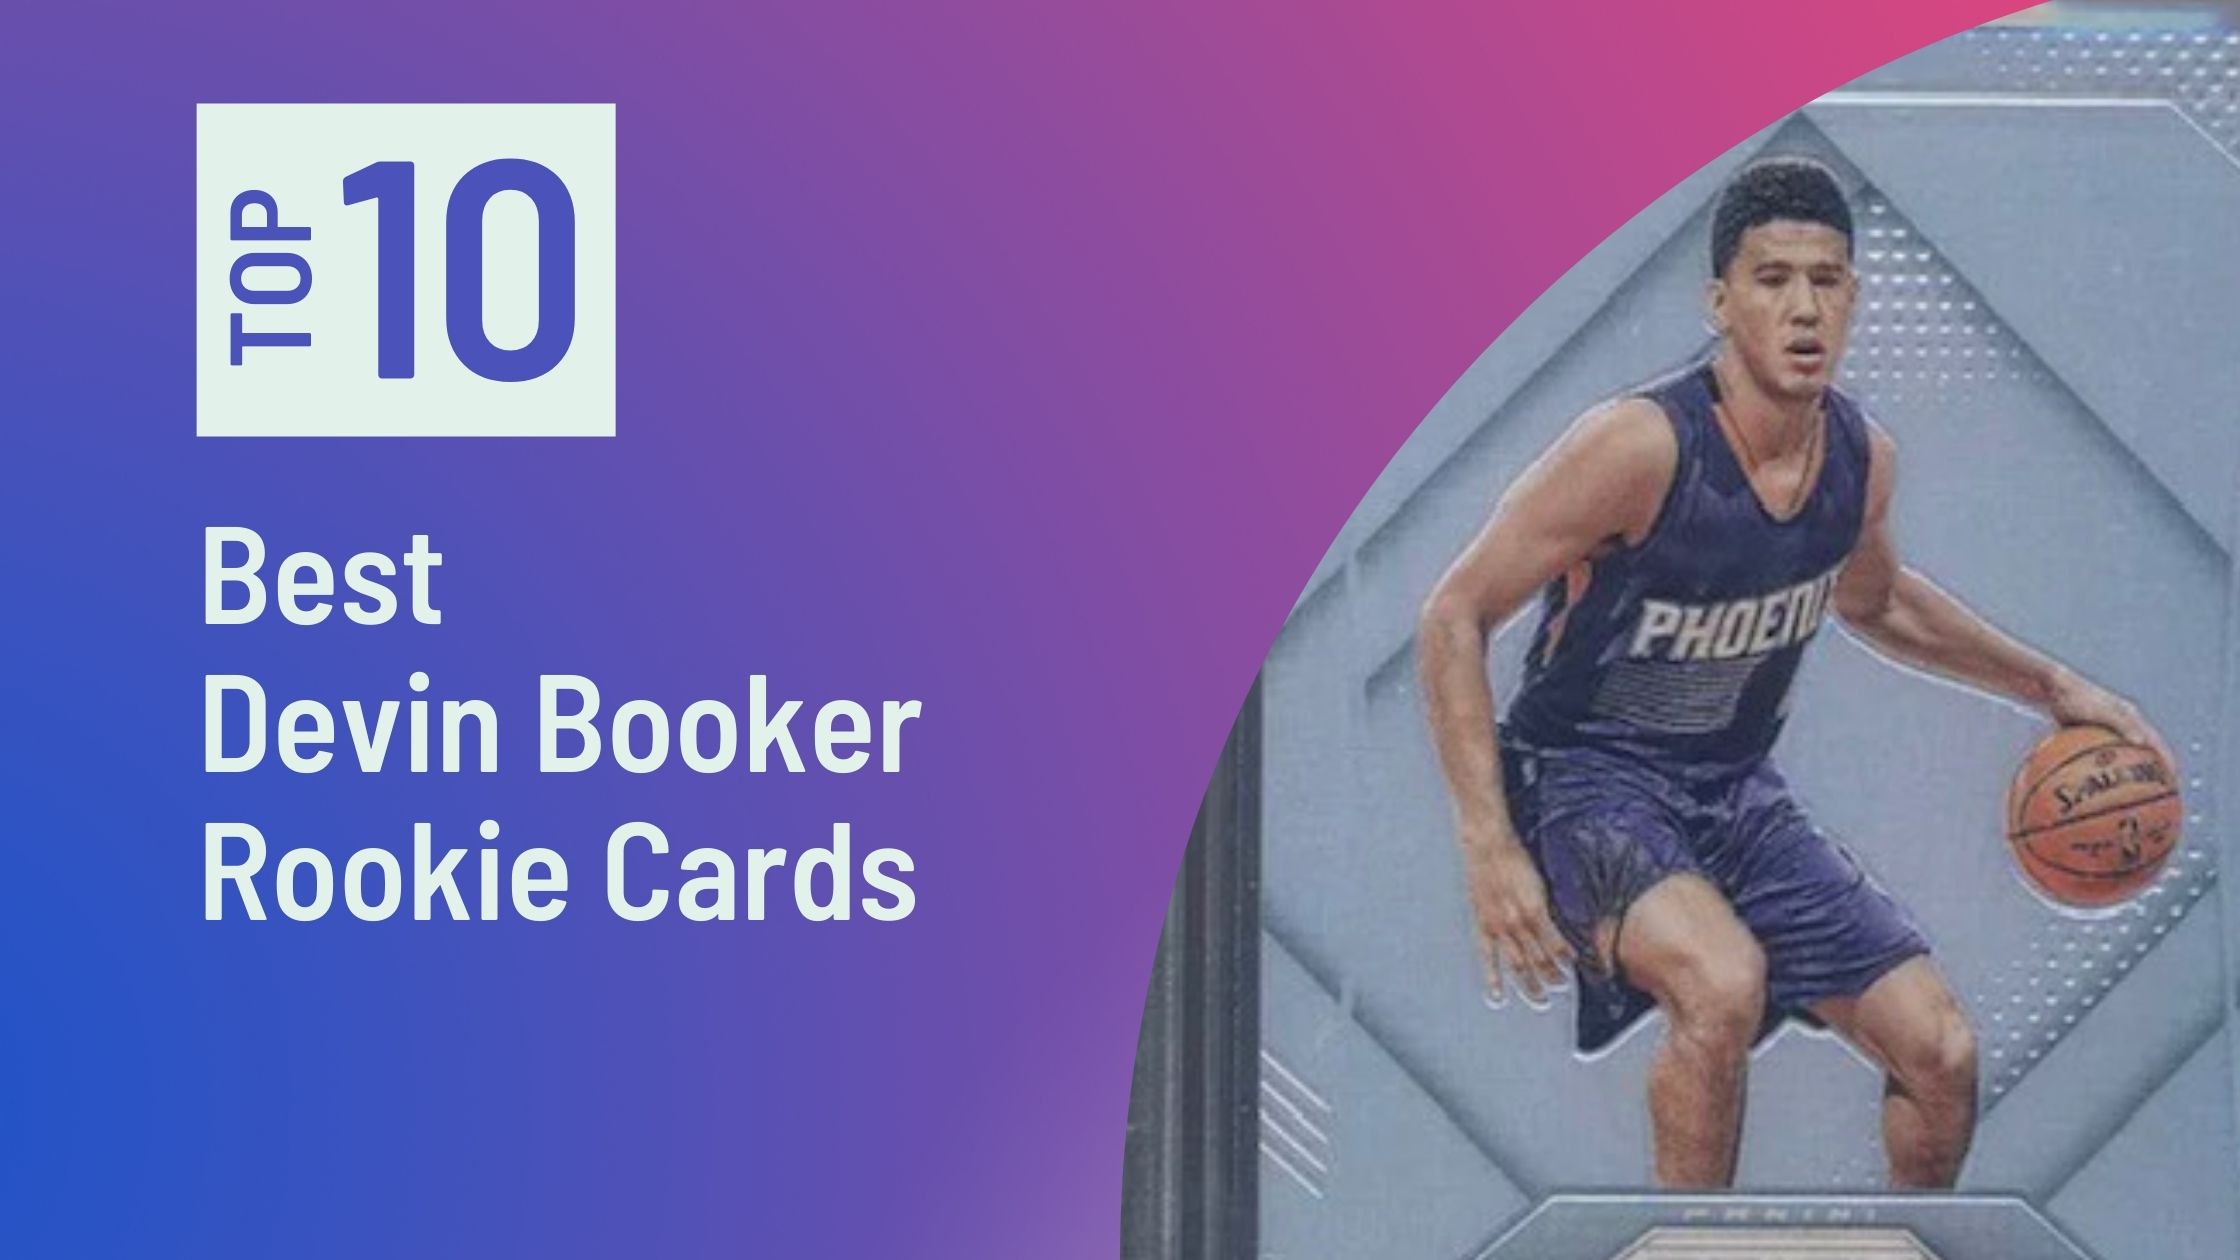 Photo of Best Devin Booker Rookie Cards